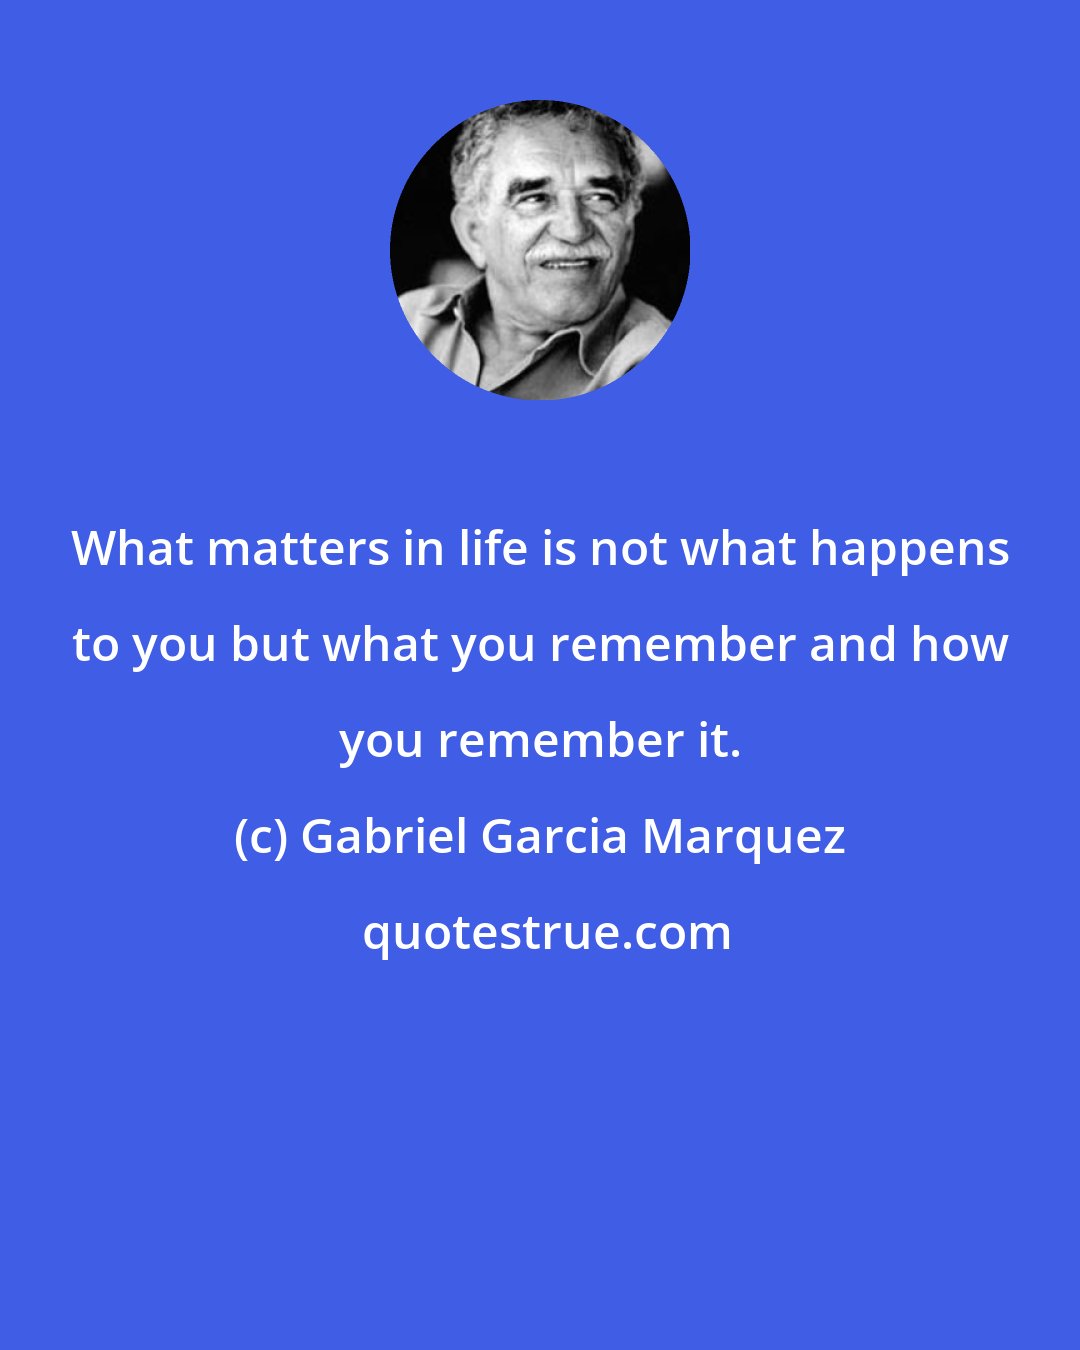 Gabriel Garcia Marquez: What matters in life is not what happens to you but what you remember and how you remember it.